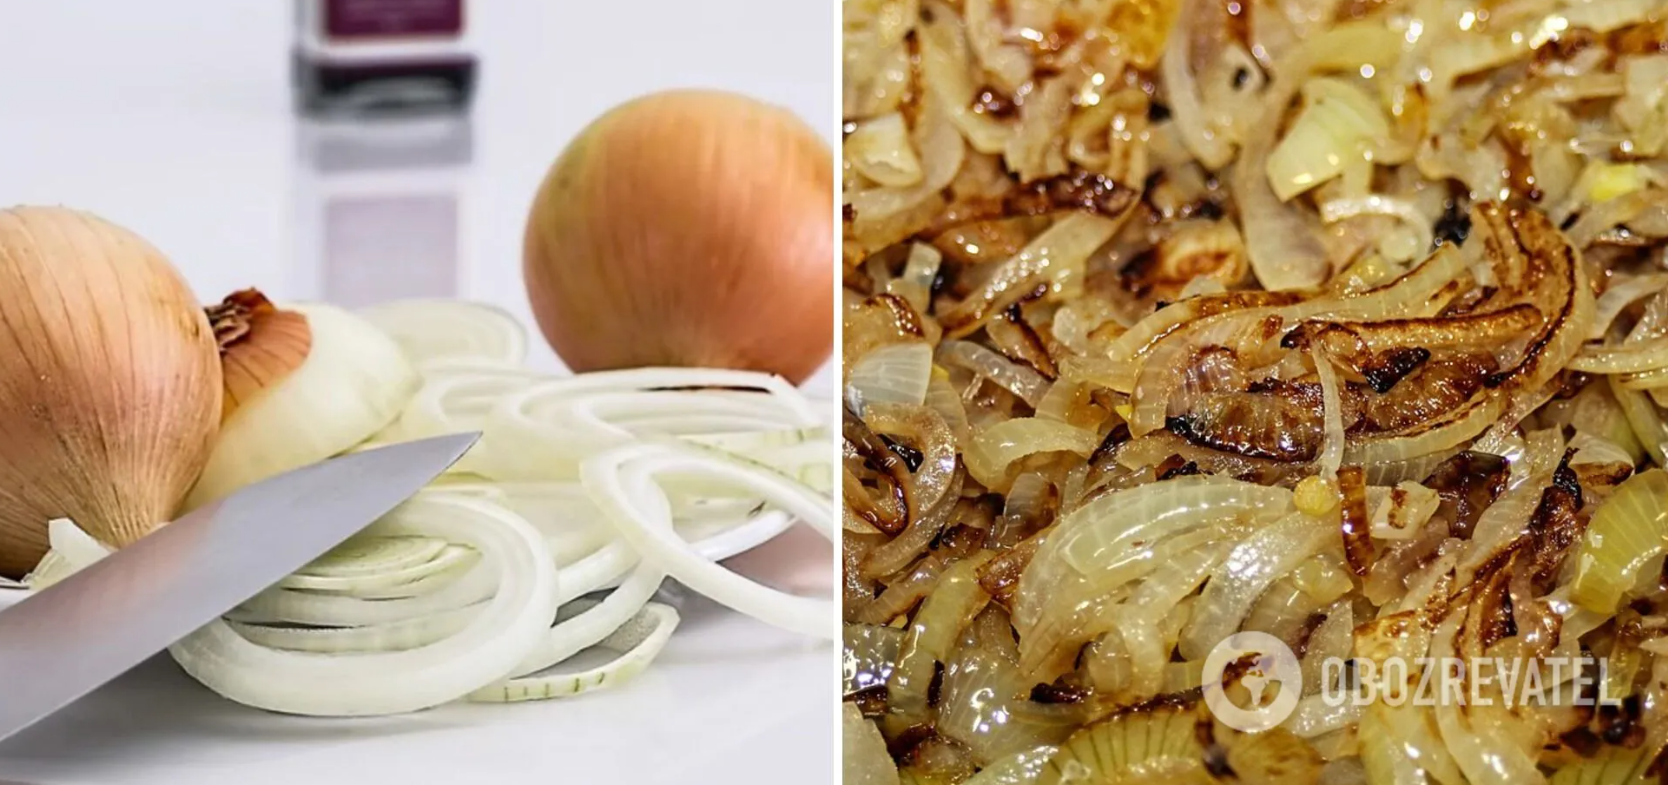 What onions to add to minced meat for cutlets